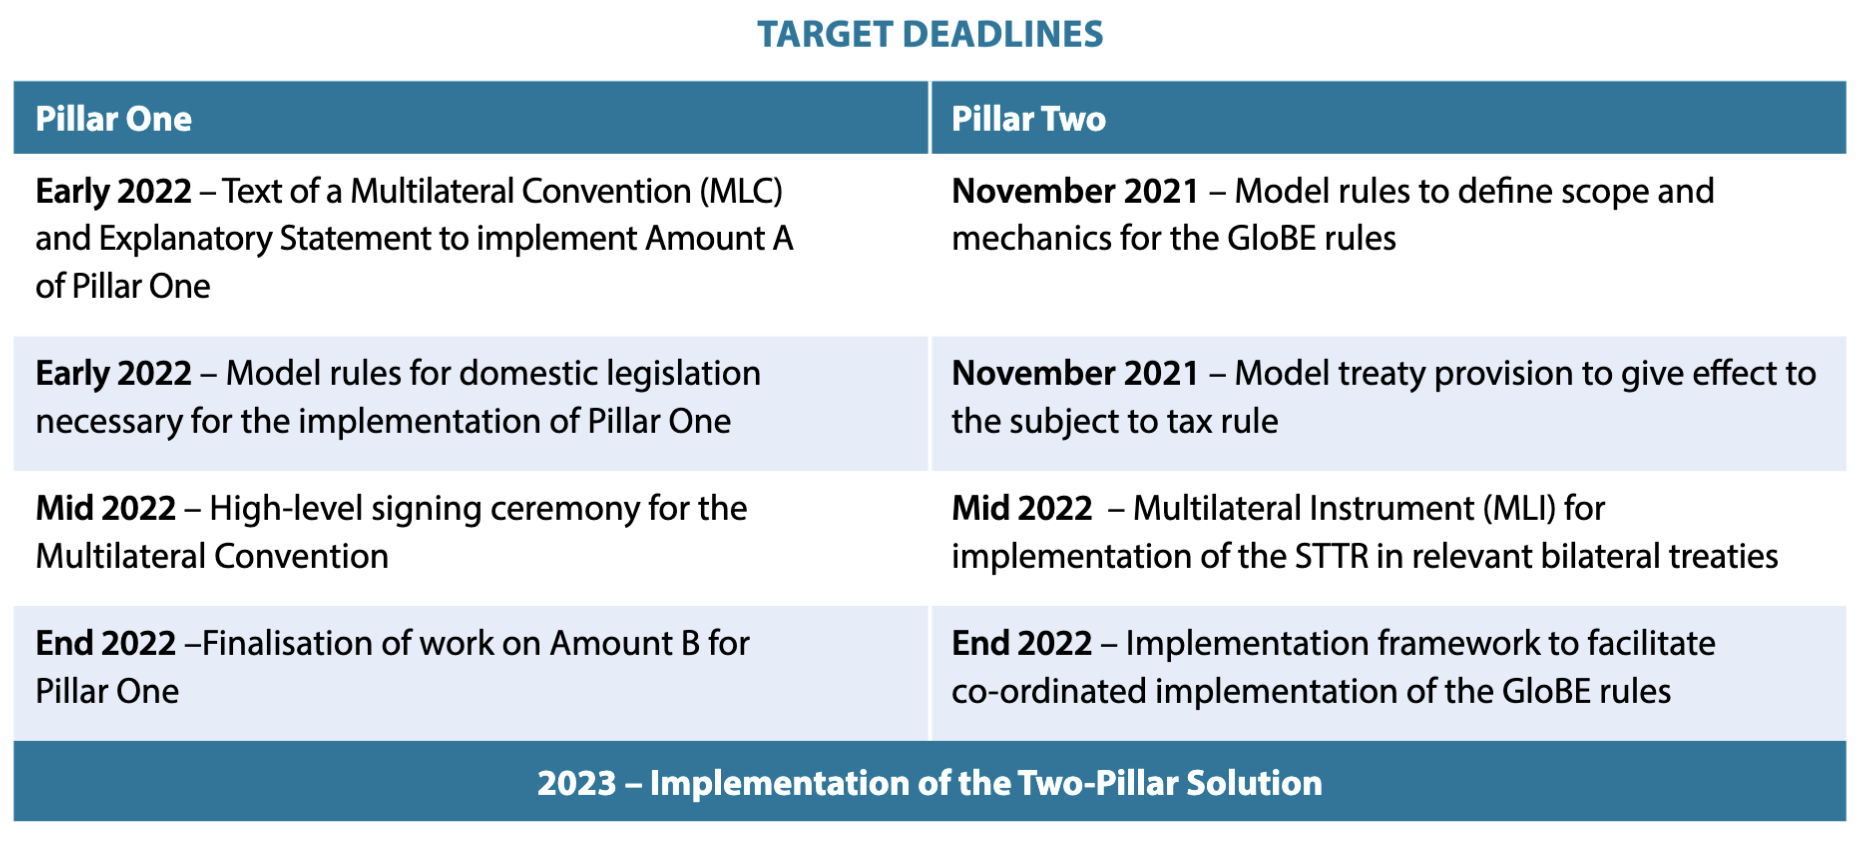 Target deadlines for Two-Pillar OECD tax rules